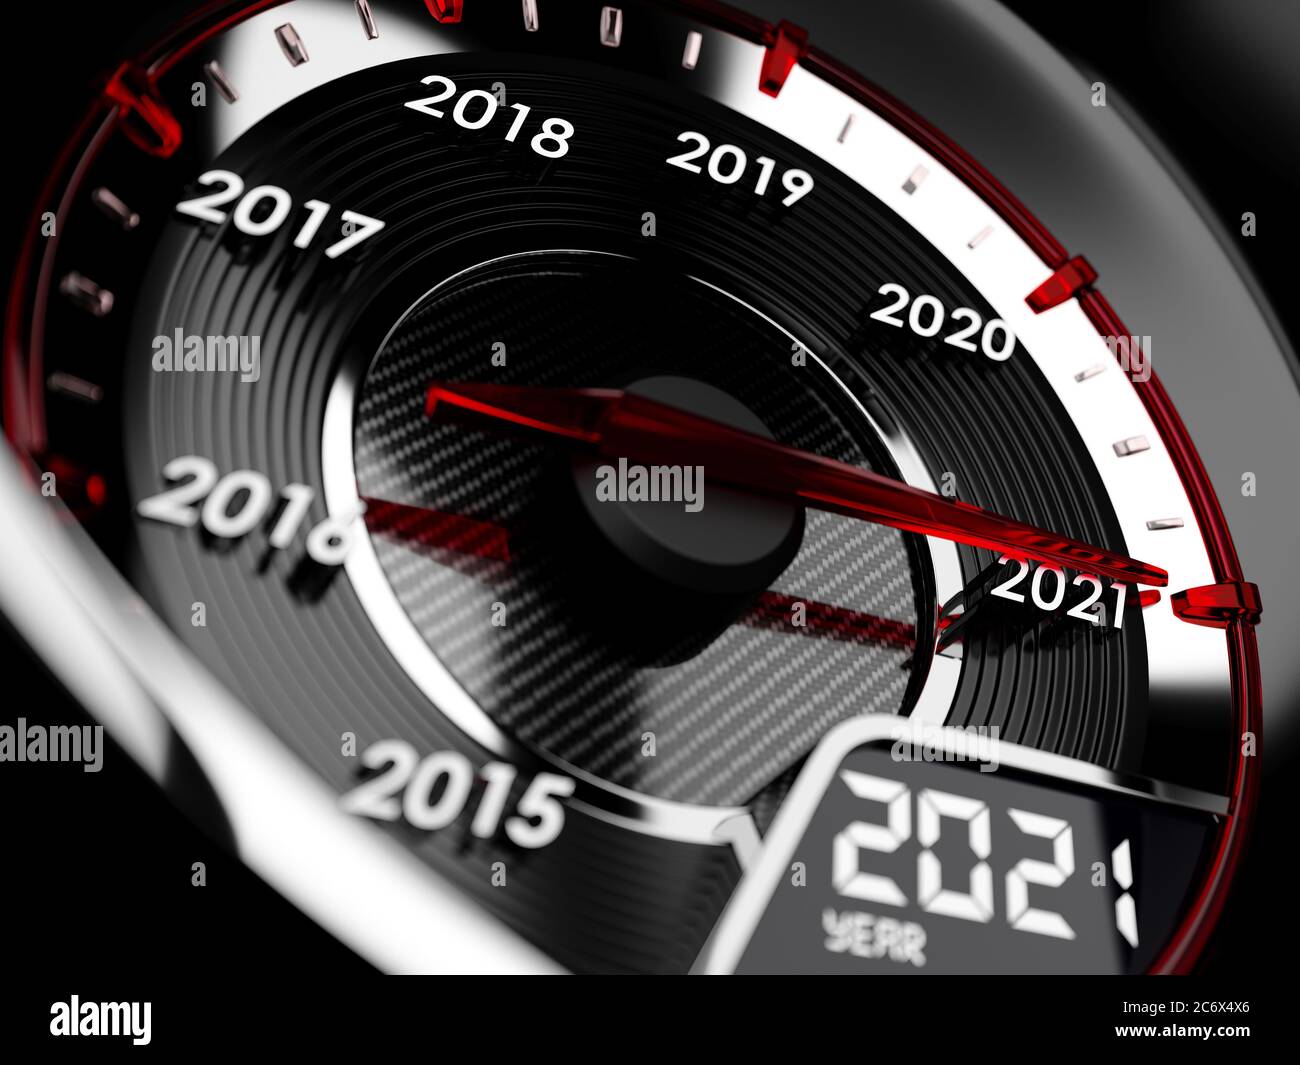 3d illustration of 2021 year car speedometer. Countdown concept Stock Photo